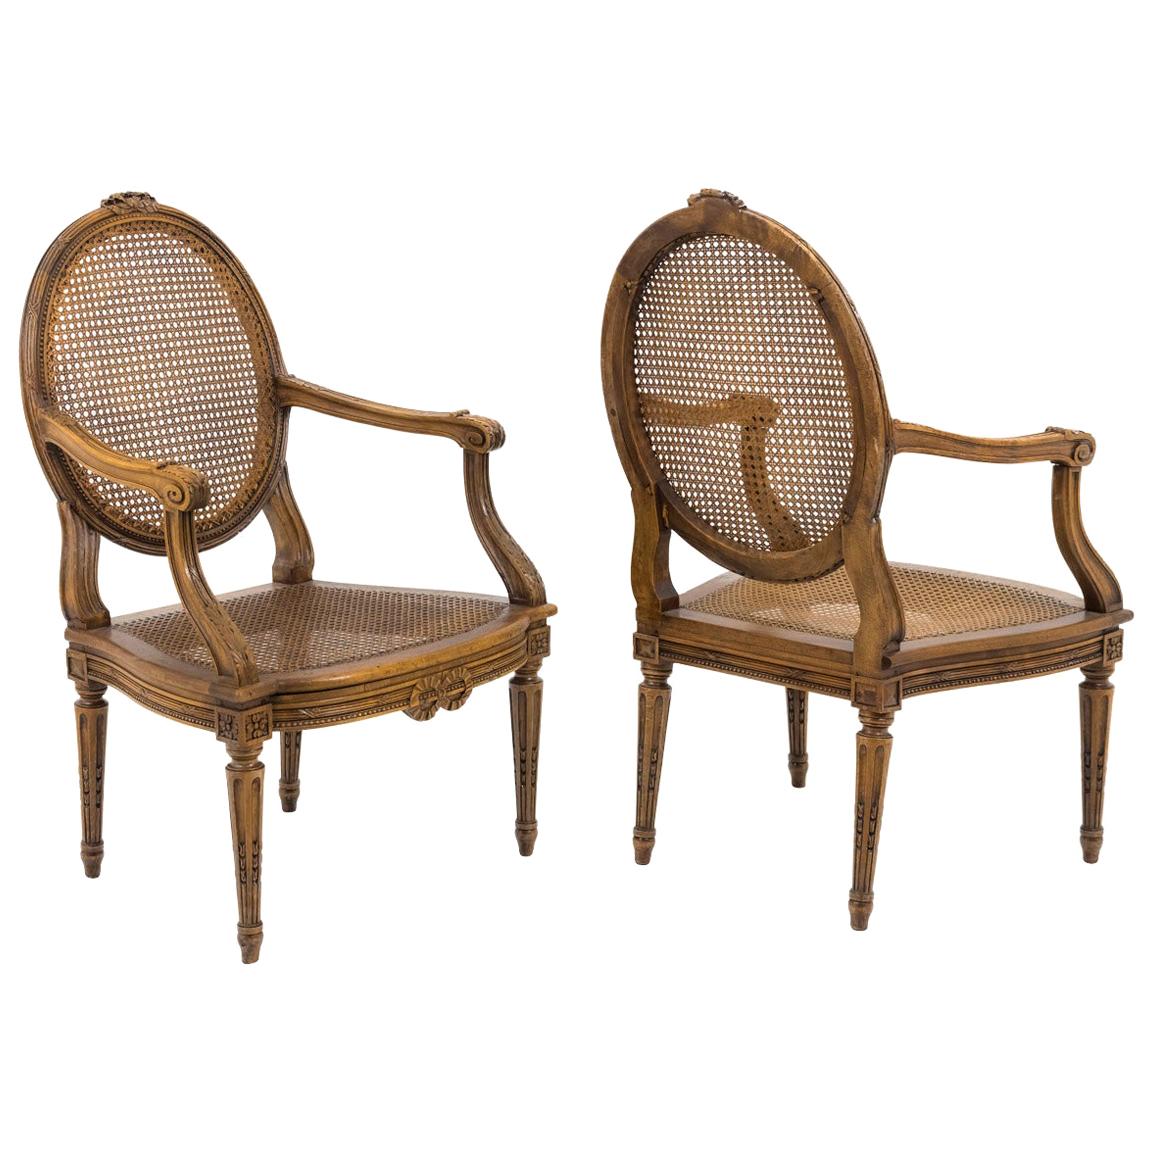 Pair of Cane Louis XVI Style Armchairs in Walnut, 19th Century